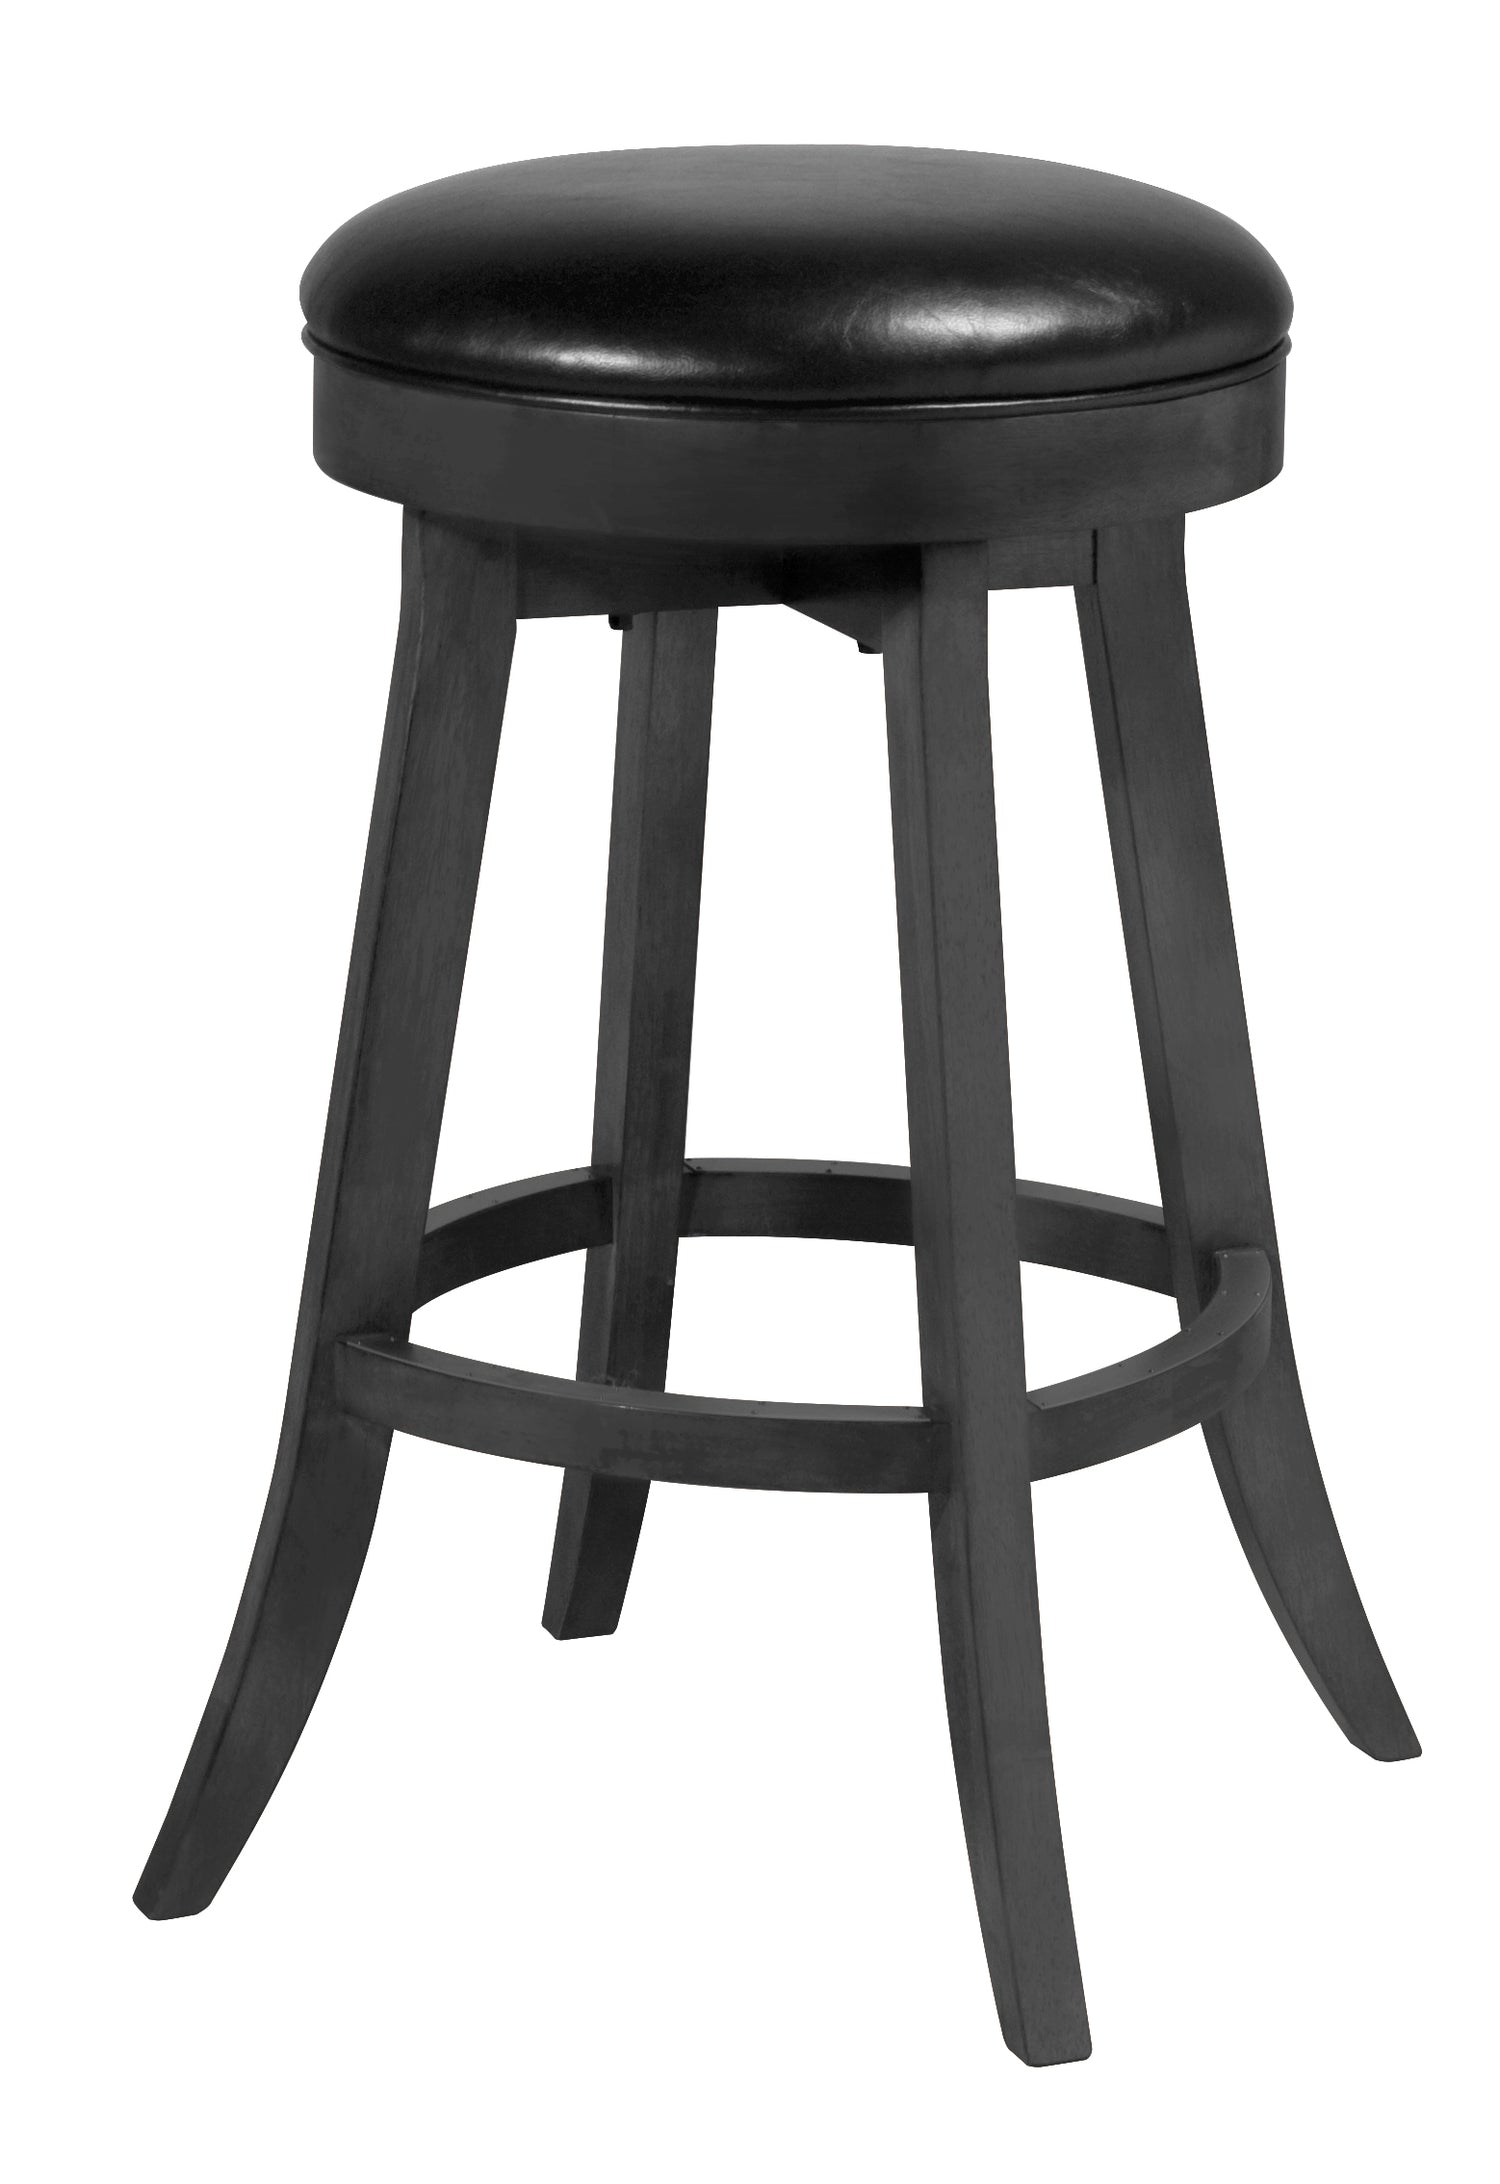 Legacy Billiards Sterling Backless Barstool in Graphite Finish